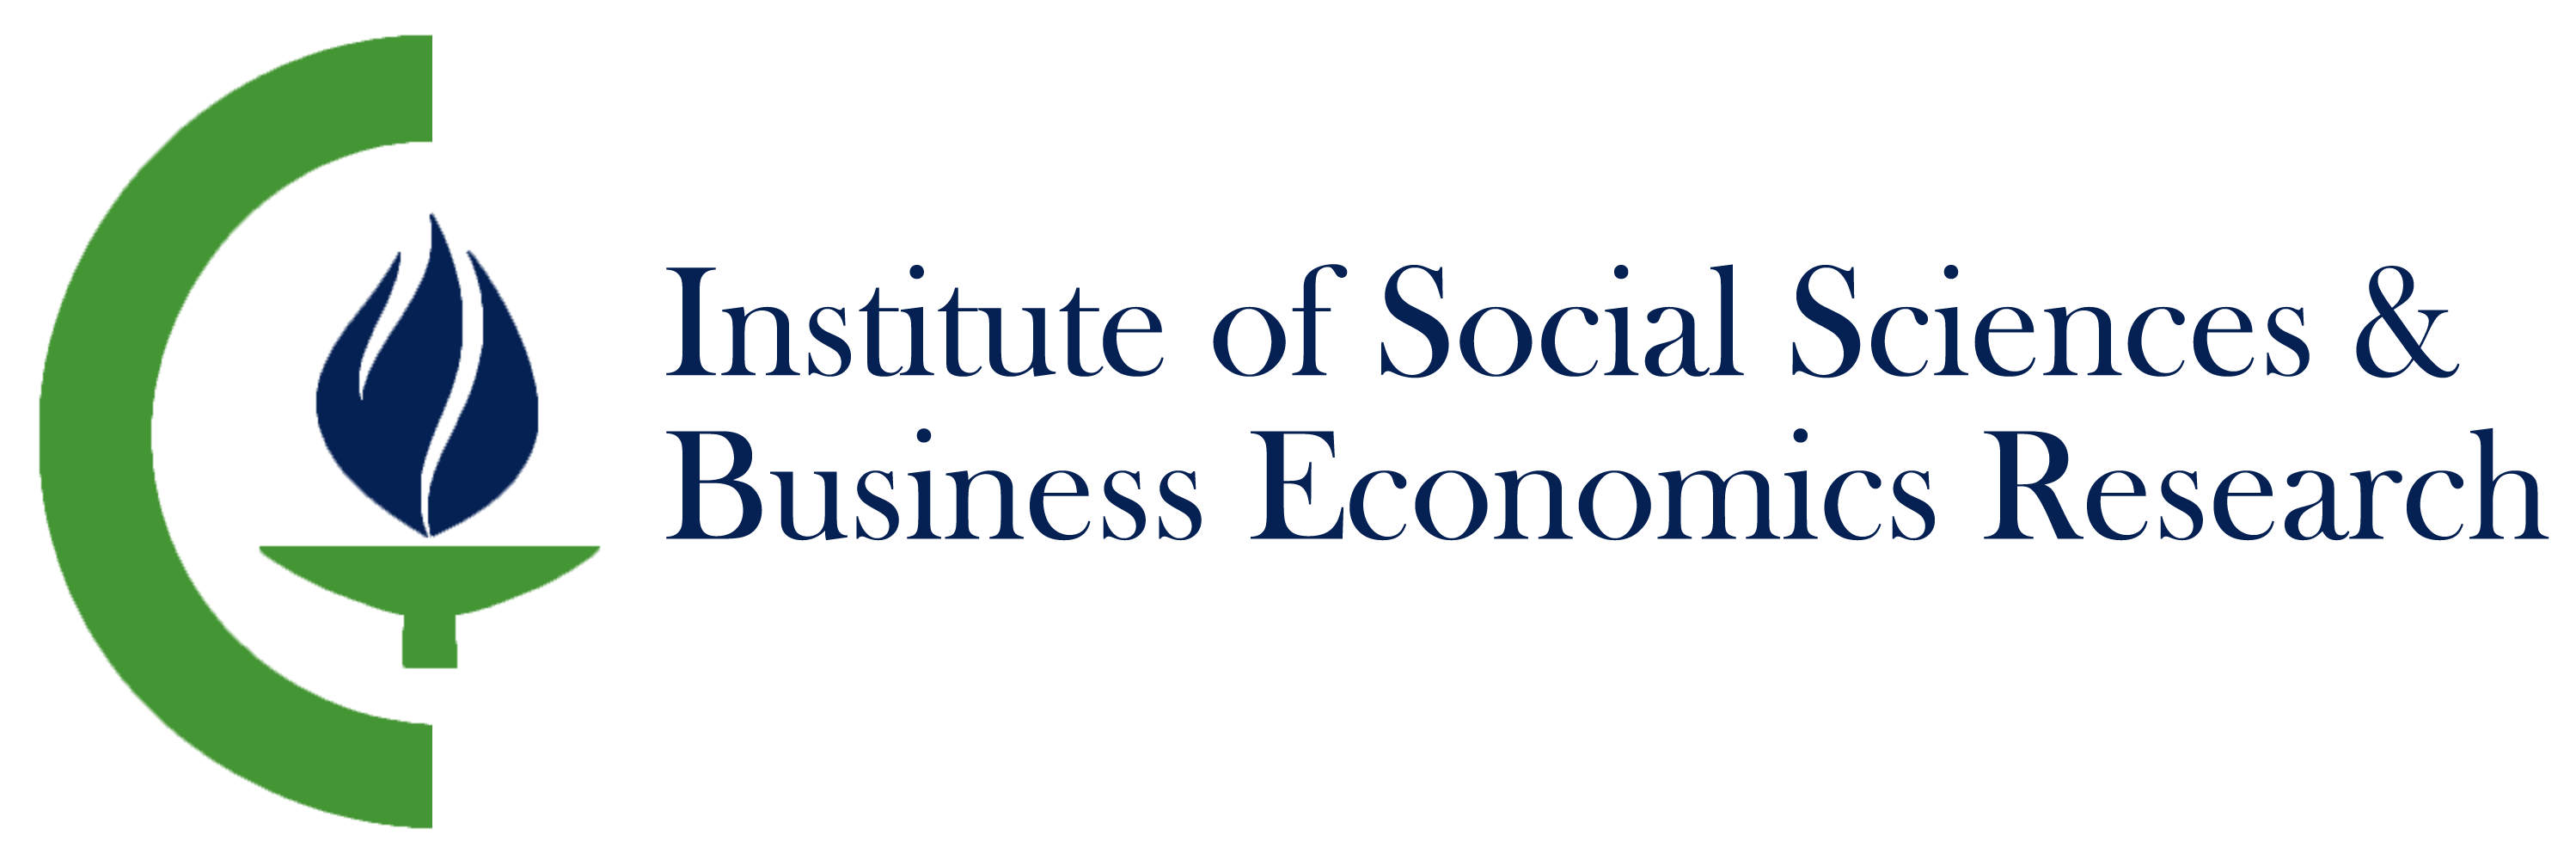 ISBER International Conference on Innovation in Global Business, Marketing, Management, Social Sciences & Economics Trade (IMME)